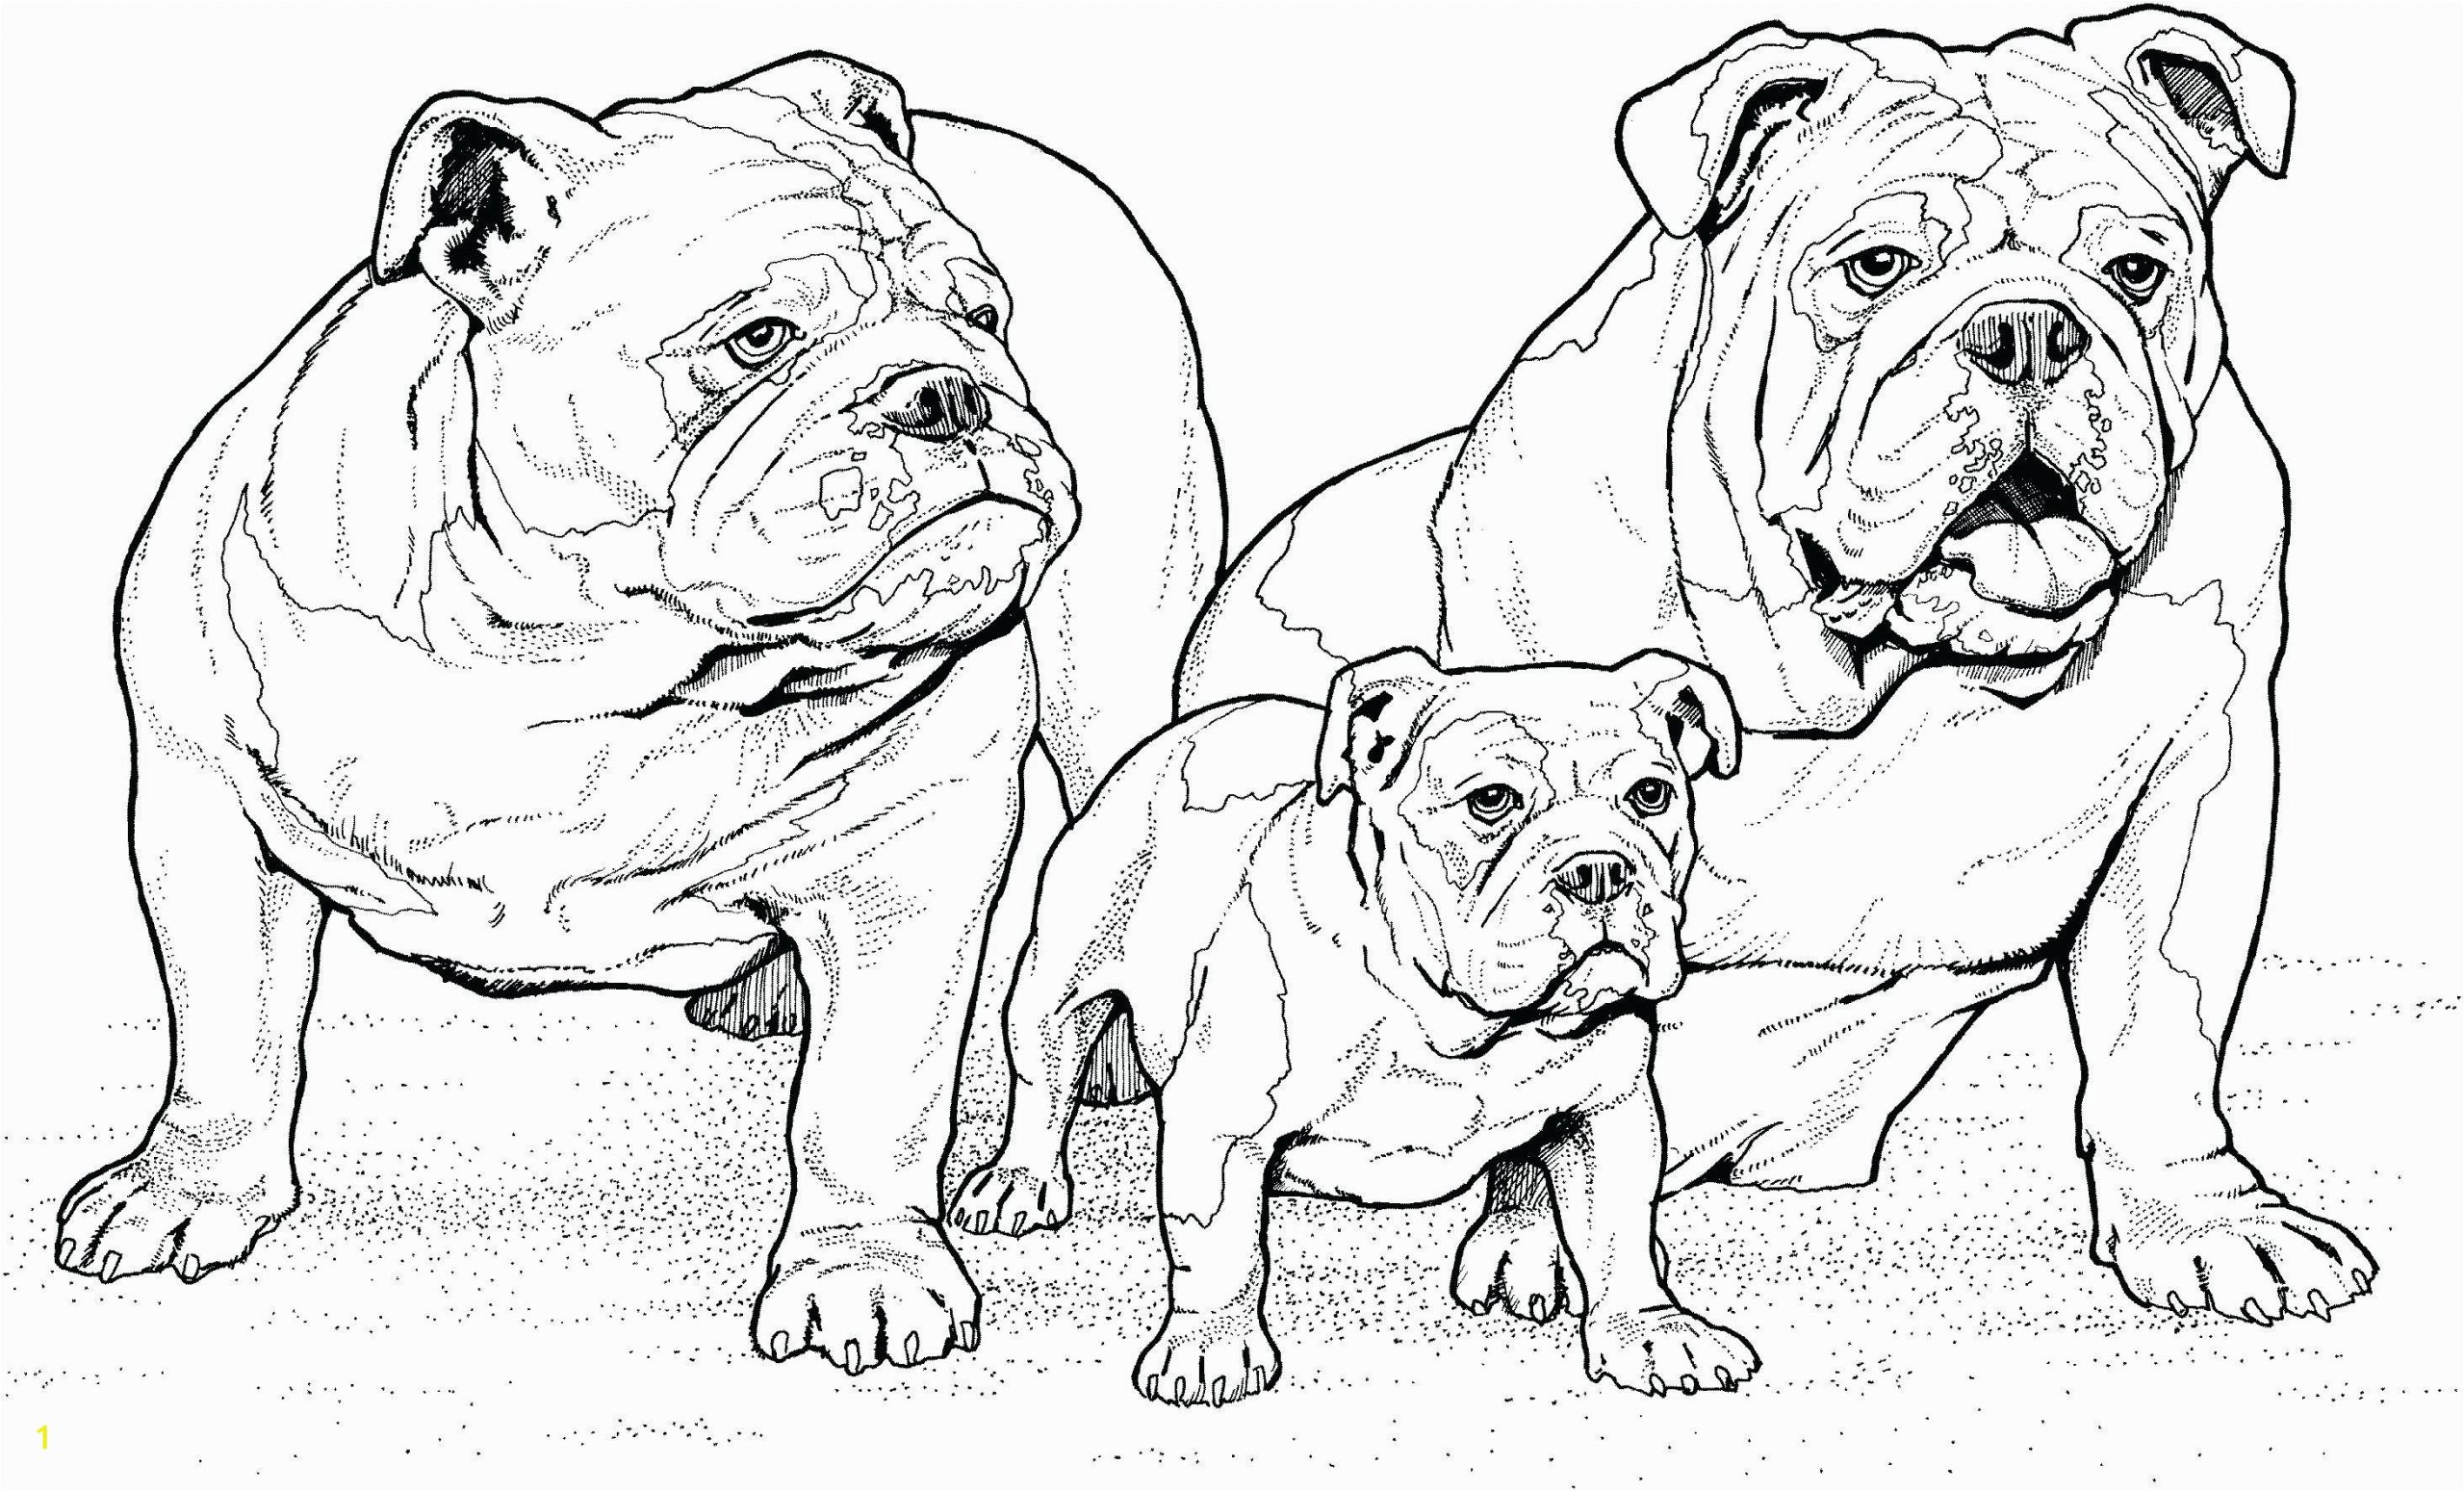 Pillow Pet Coloring Page Printable Dog Coloring Pages Ideas for Kids